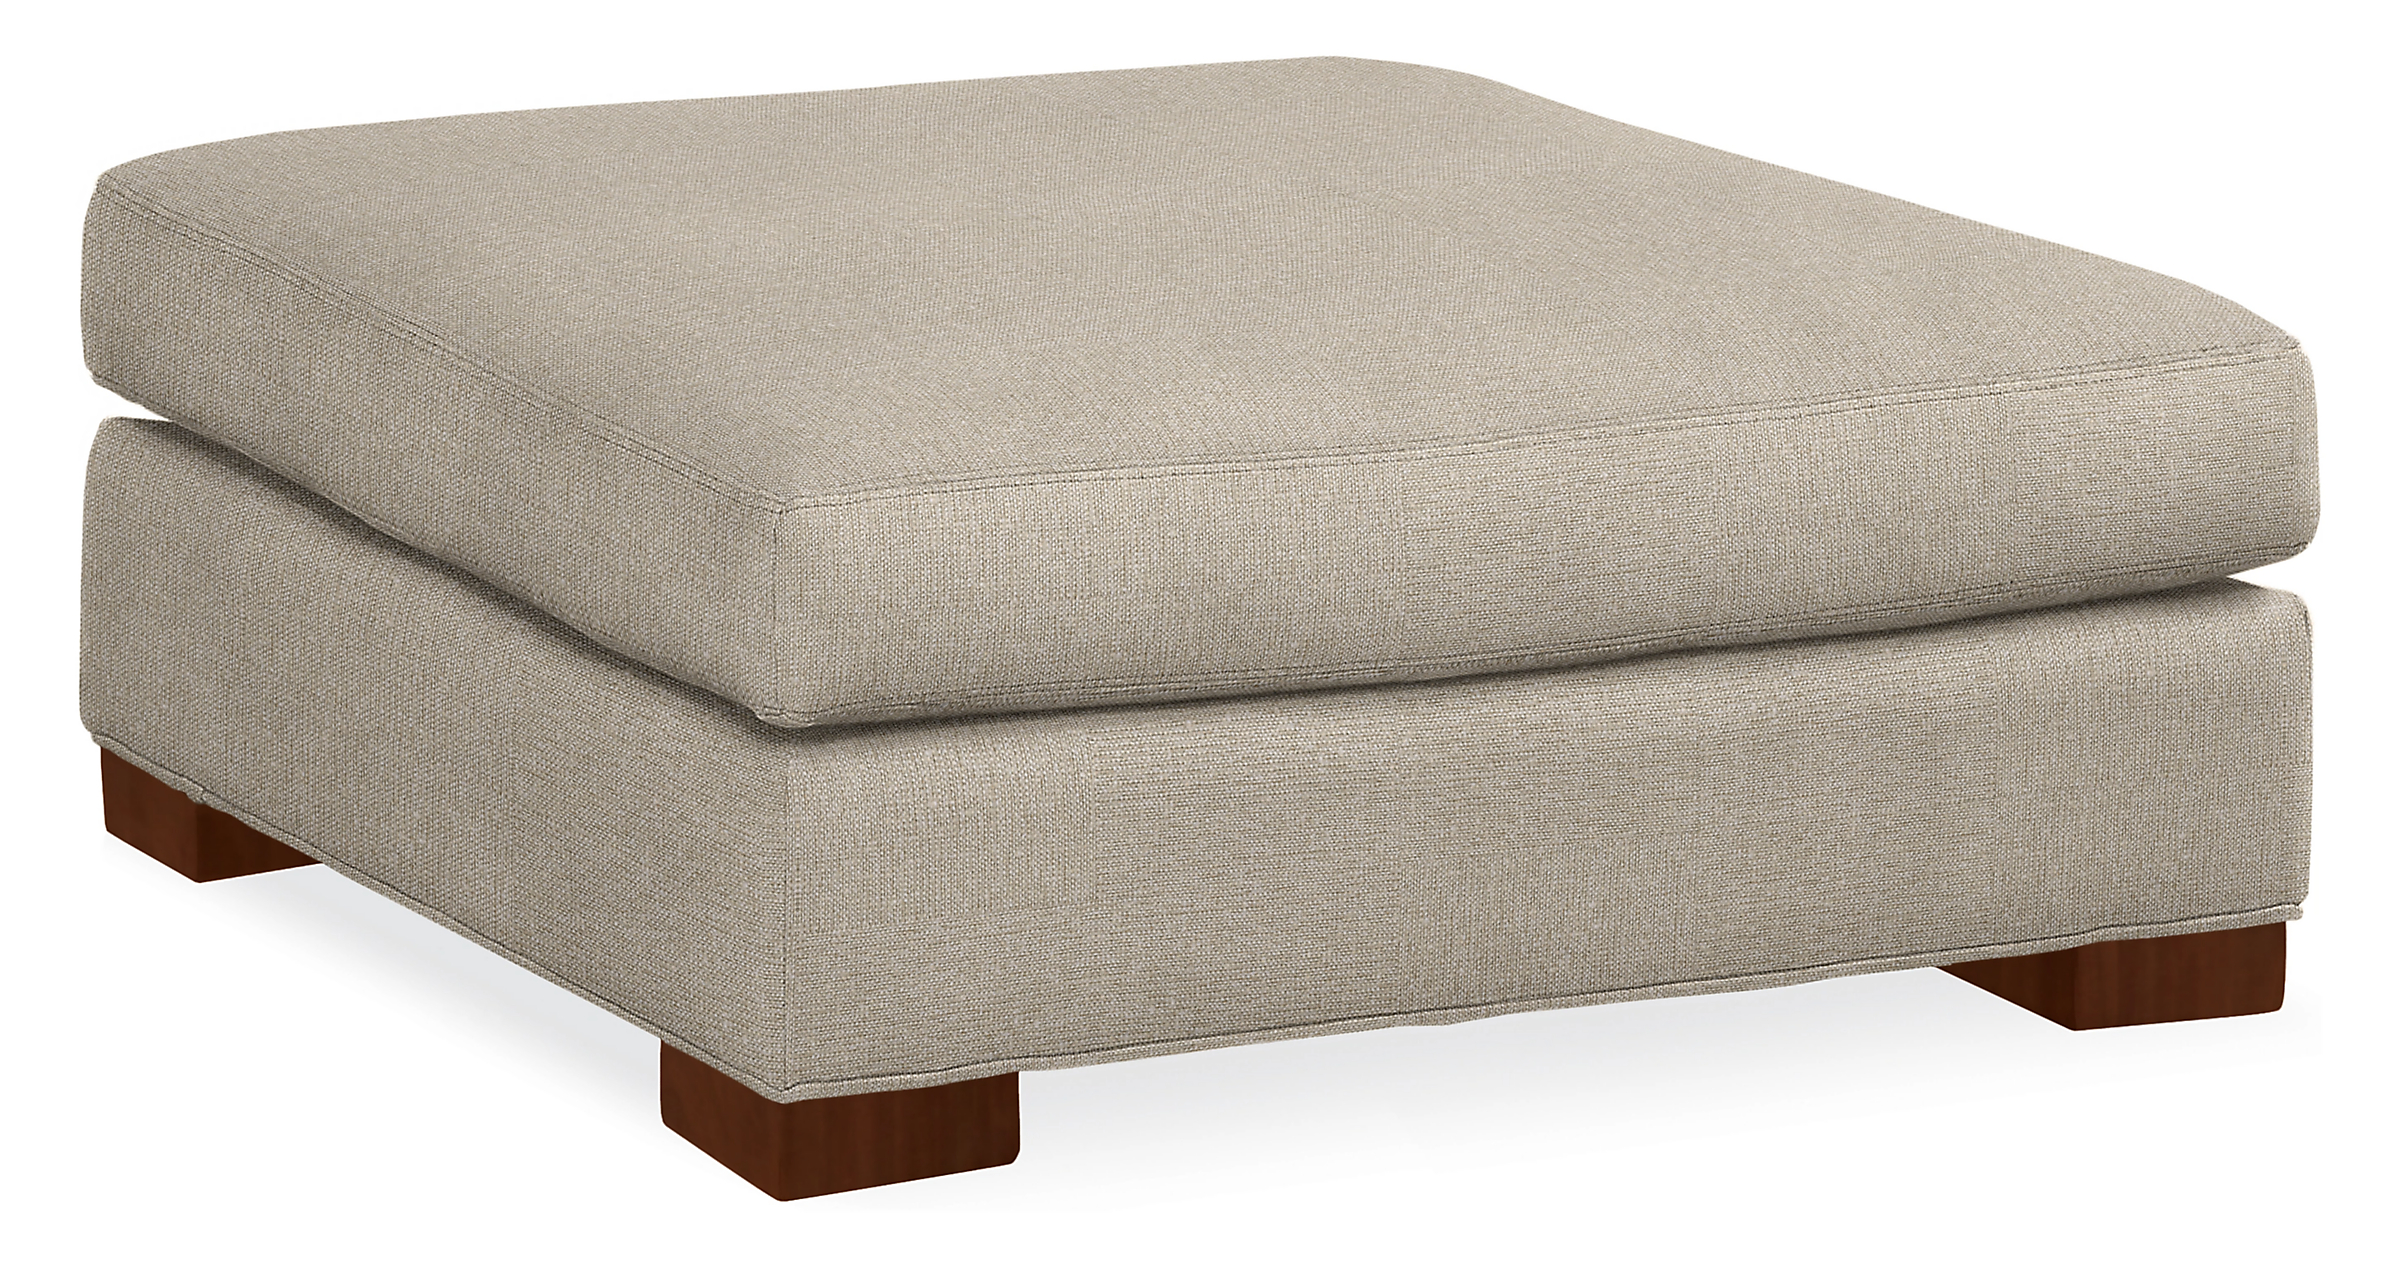 Metro 38w 38d 17h Square Ottoman in Conley Natural with Mocha Legs